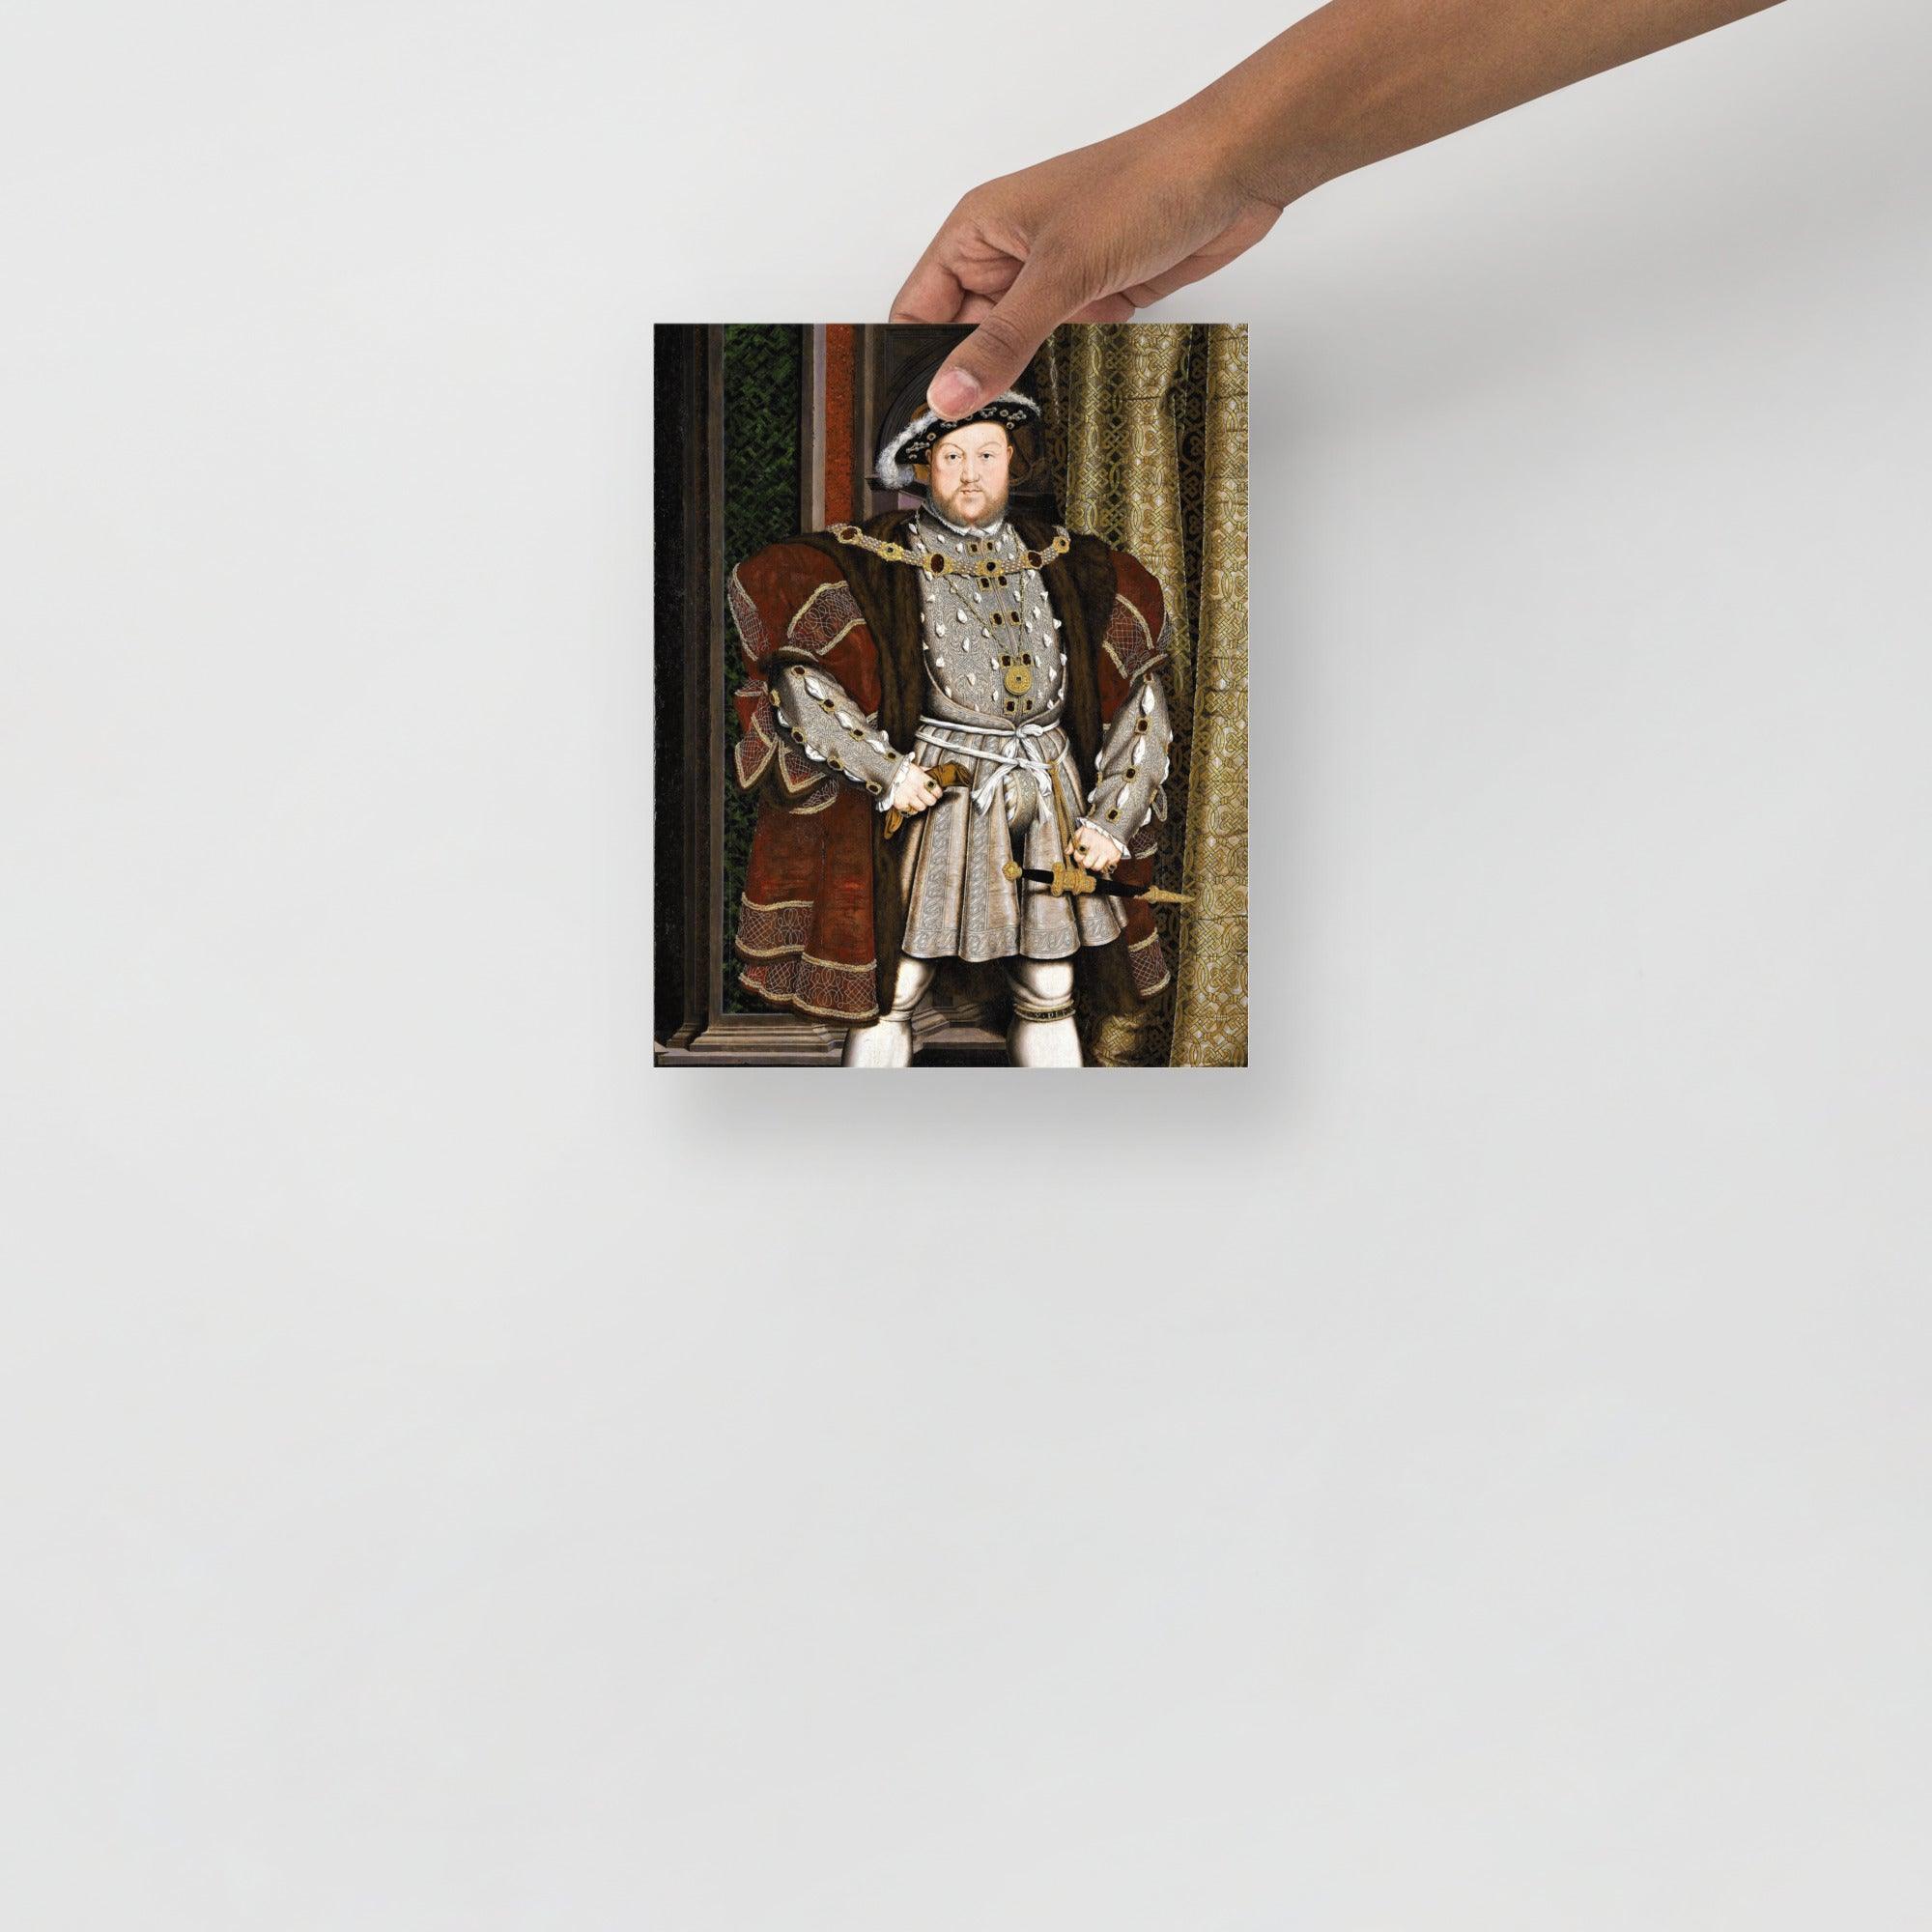 A Henry VIII Of England poster on a plain backdrop in size 8x10”.